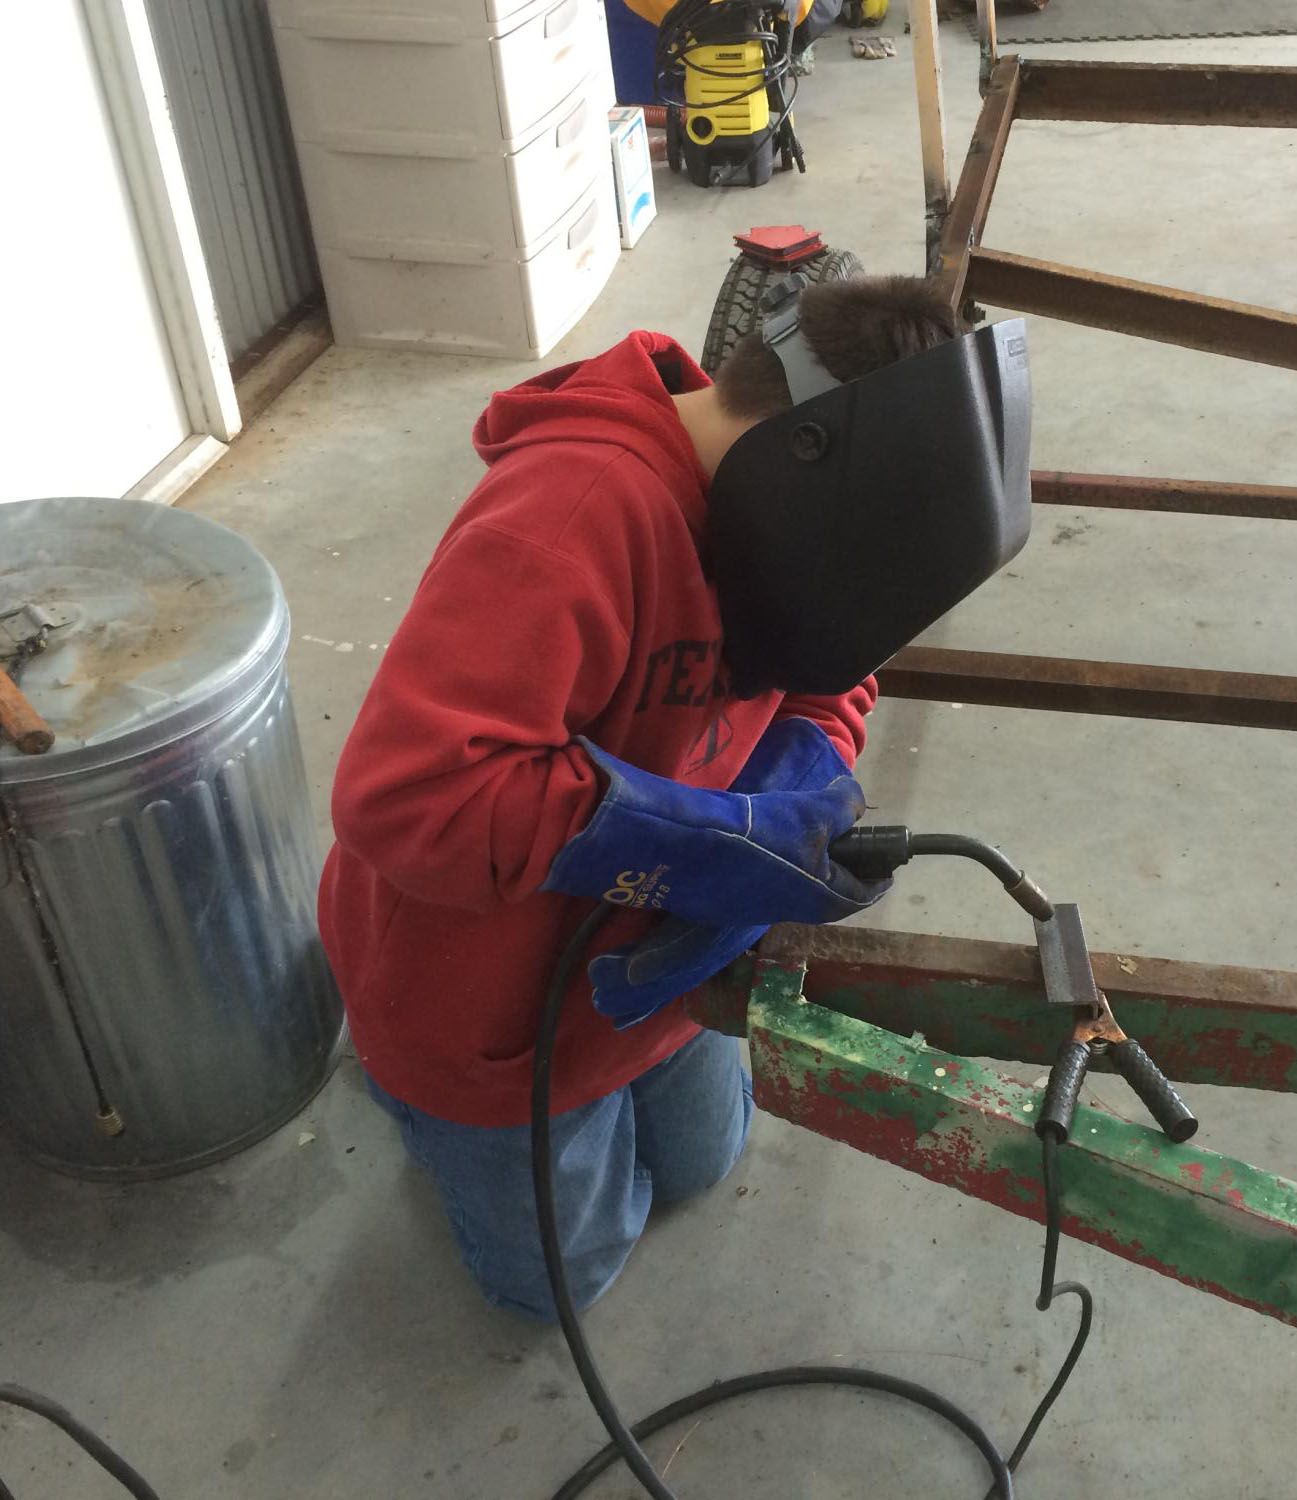 young person in red hoodie and jeans kneeling on the floor welding